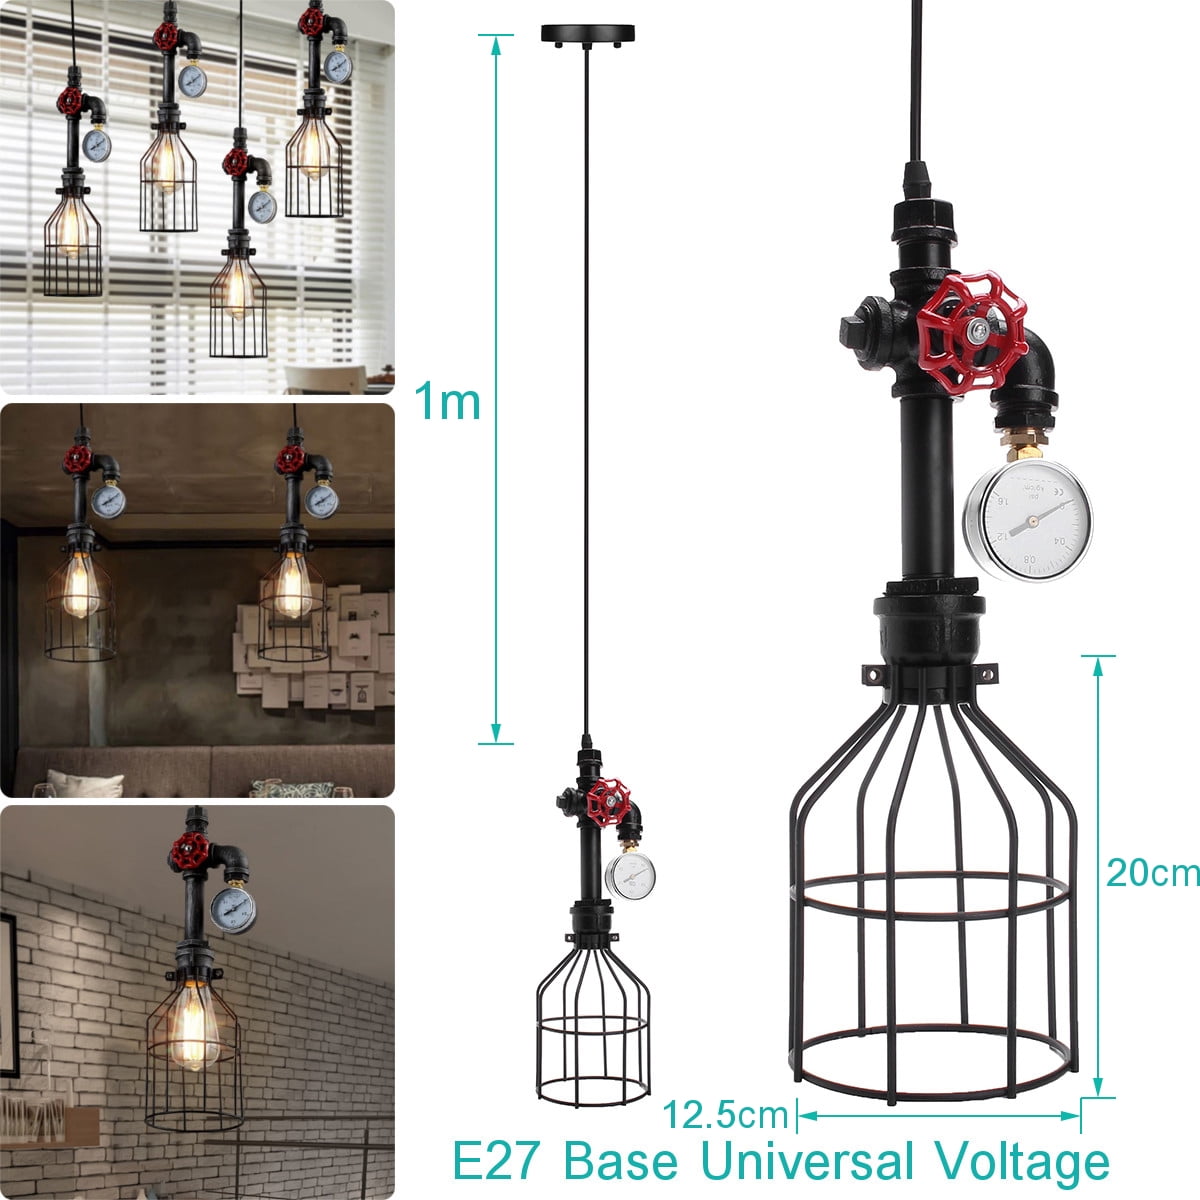 LEDSone Industrial 3 Way Vintage Retro Style Steampunk Pipe Light Bar with Lamp Shade Pendant Light Fitting Metal Pipe Lighting Ceiling Light UK Brushed Silver